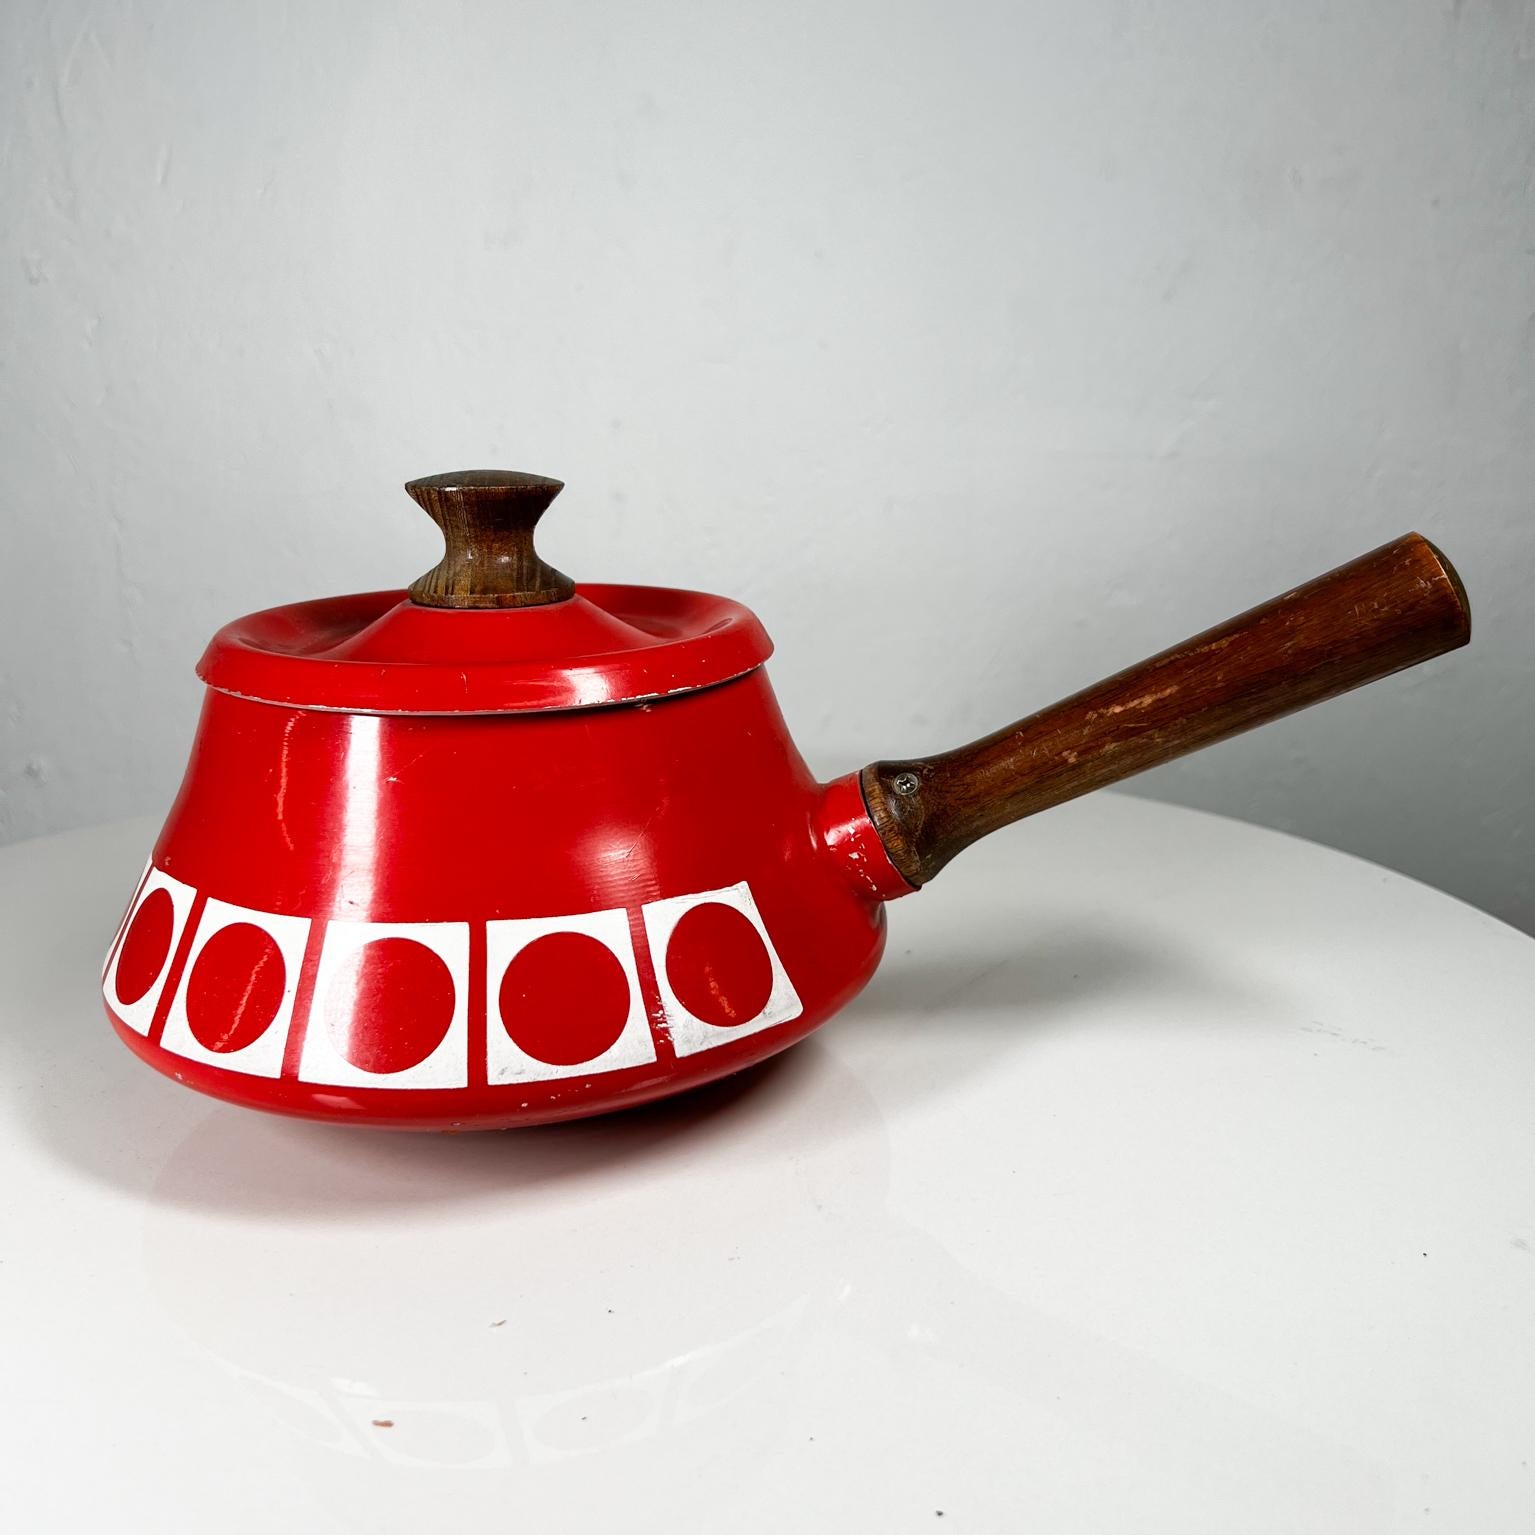 1960s Modern Atomic Red Fondue Sauce Pot by Imperial Inter Japan
Maker stamped.
Wood Handle and Red Decorative Design
12.75 d x 7.5 w x 4.75 tall and 6 h with lid
Preowned unrestored vintage condition 

See images listed please.